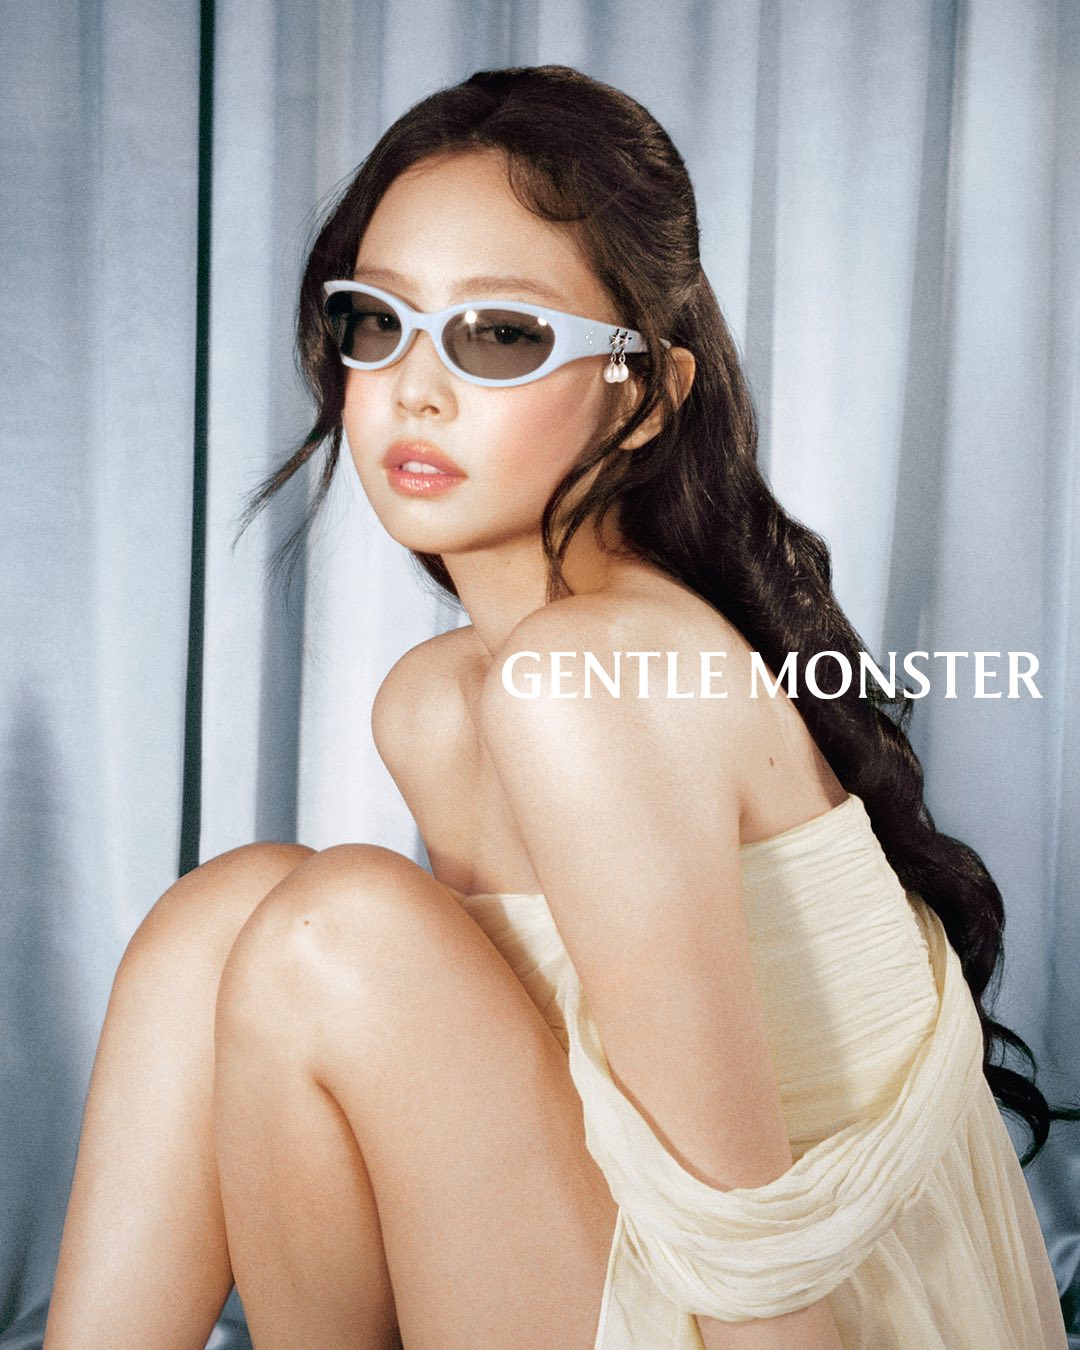 , Blackpink’s Jennie and Gentle Monster launches Jentle Salon collection with pop-up at MBS